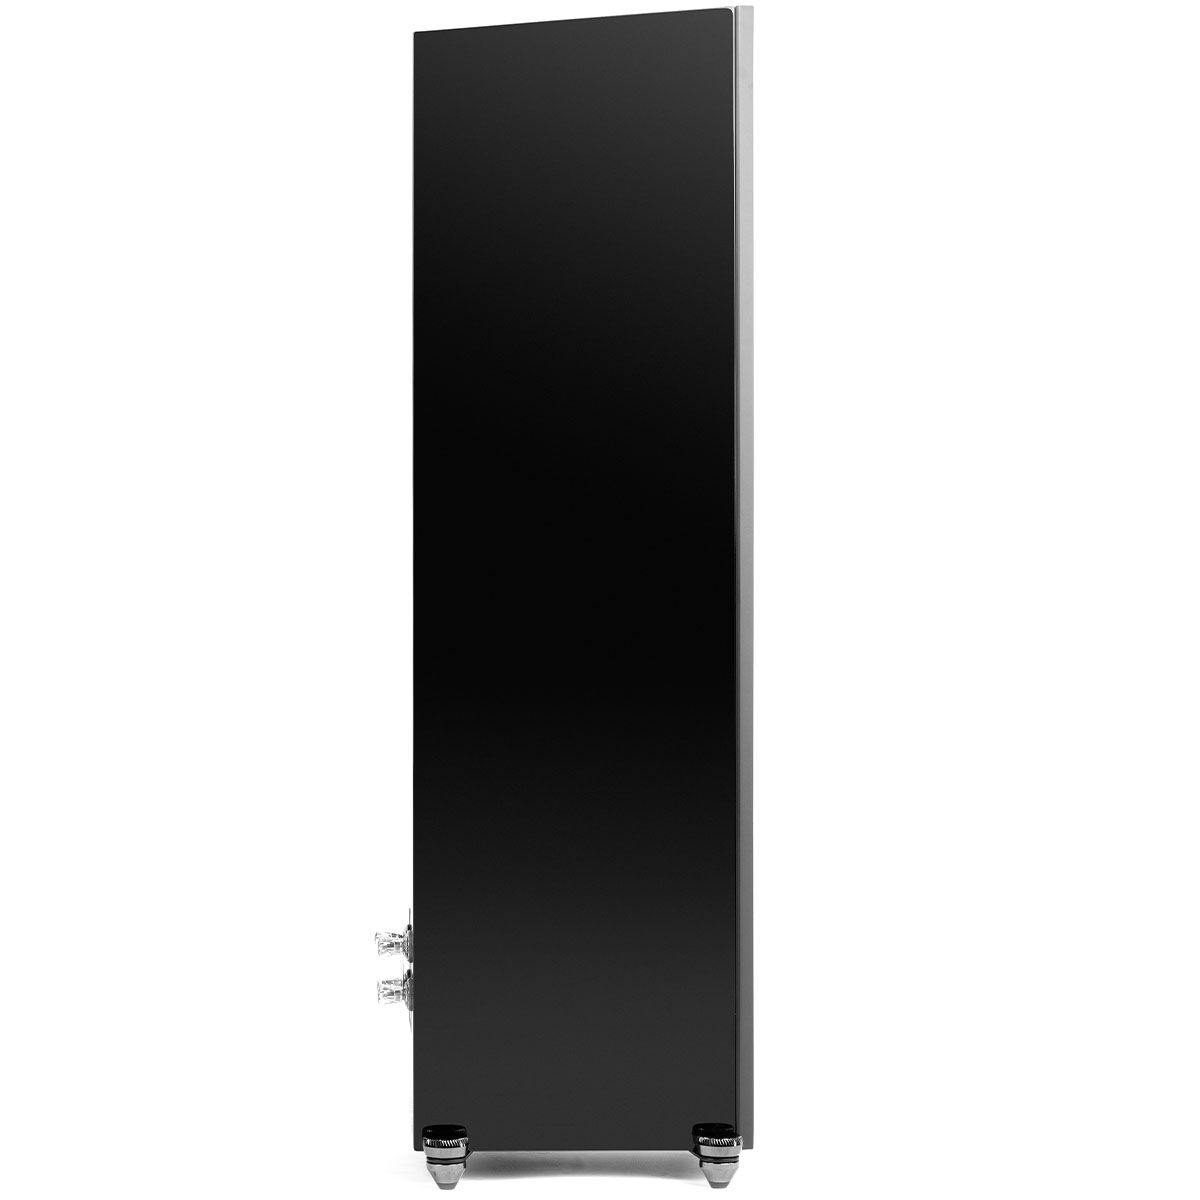 MartinLogan Motion XT F20  Floorstanding Speaker in black side view without grilles on white background